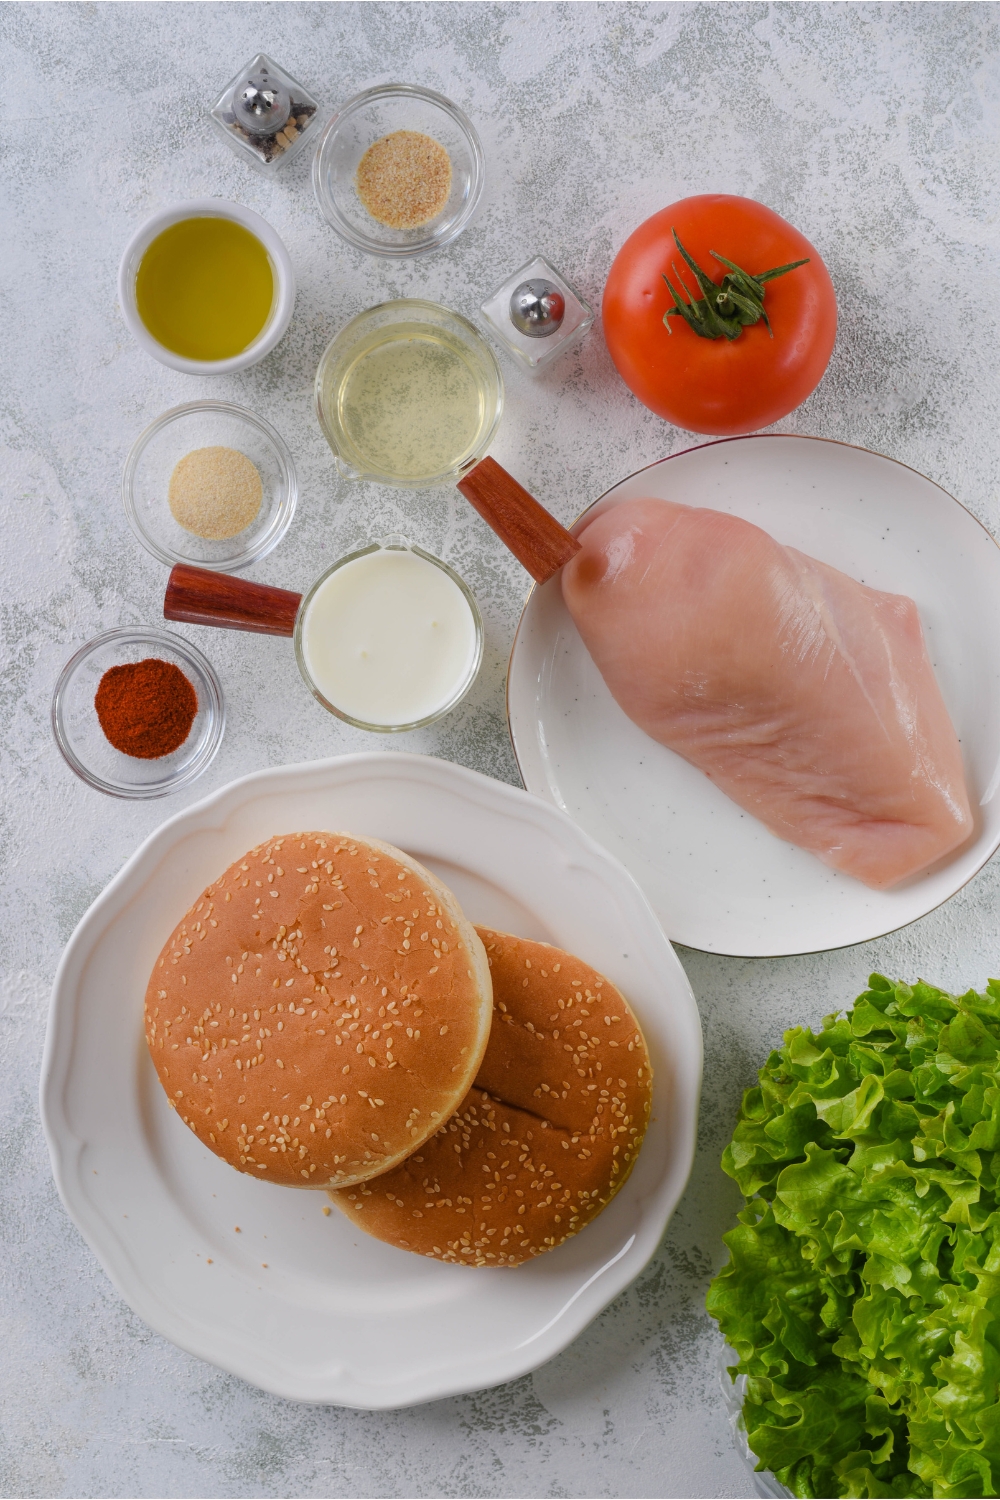 Overhead view of an assortment of ingredients including a plate of hamburger buns, a plate of raw chicken, a large tomato, and bowls of spices, oil, and buttermilk.